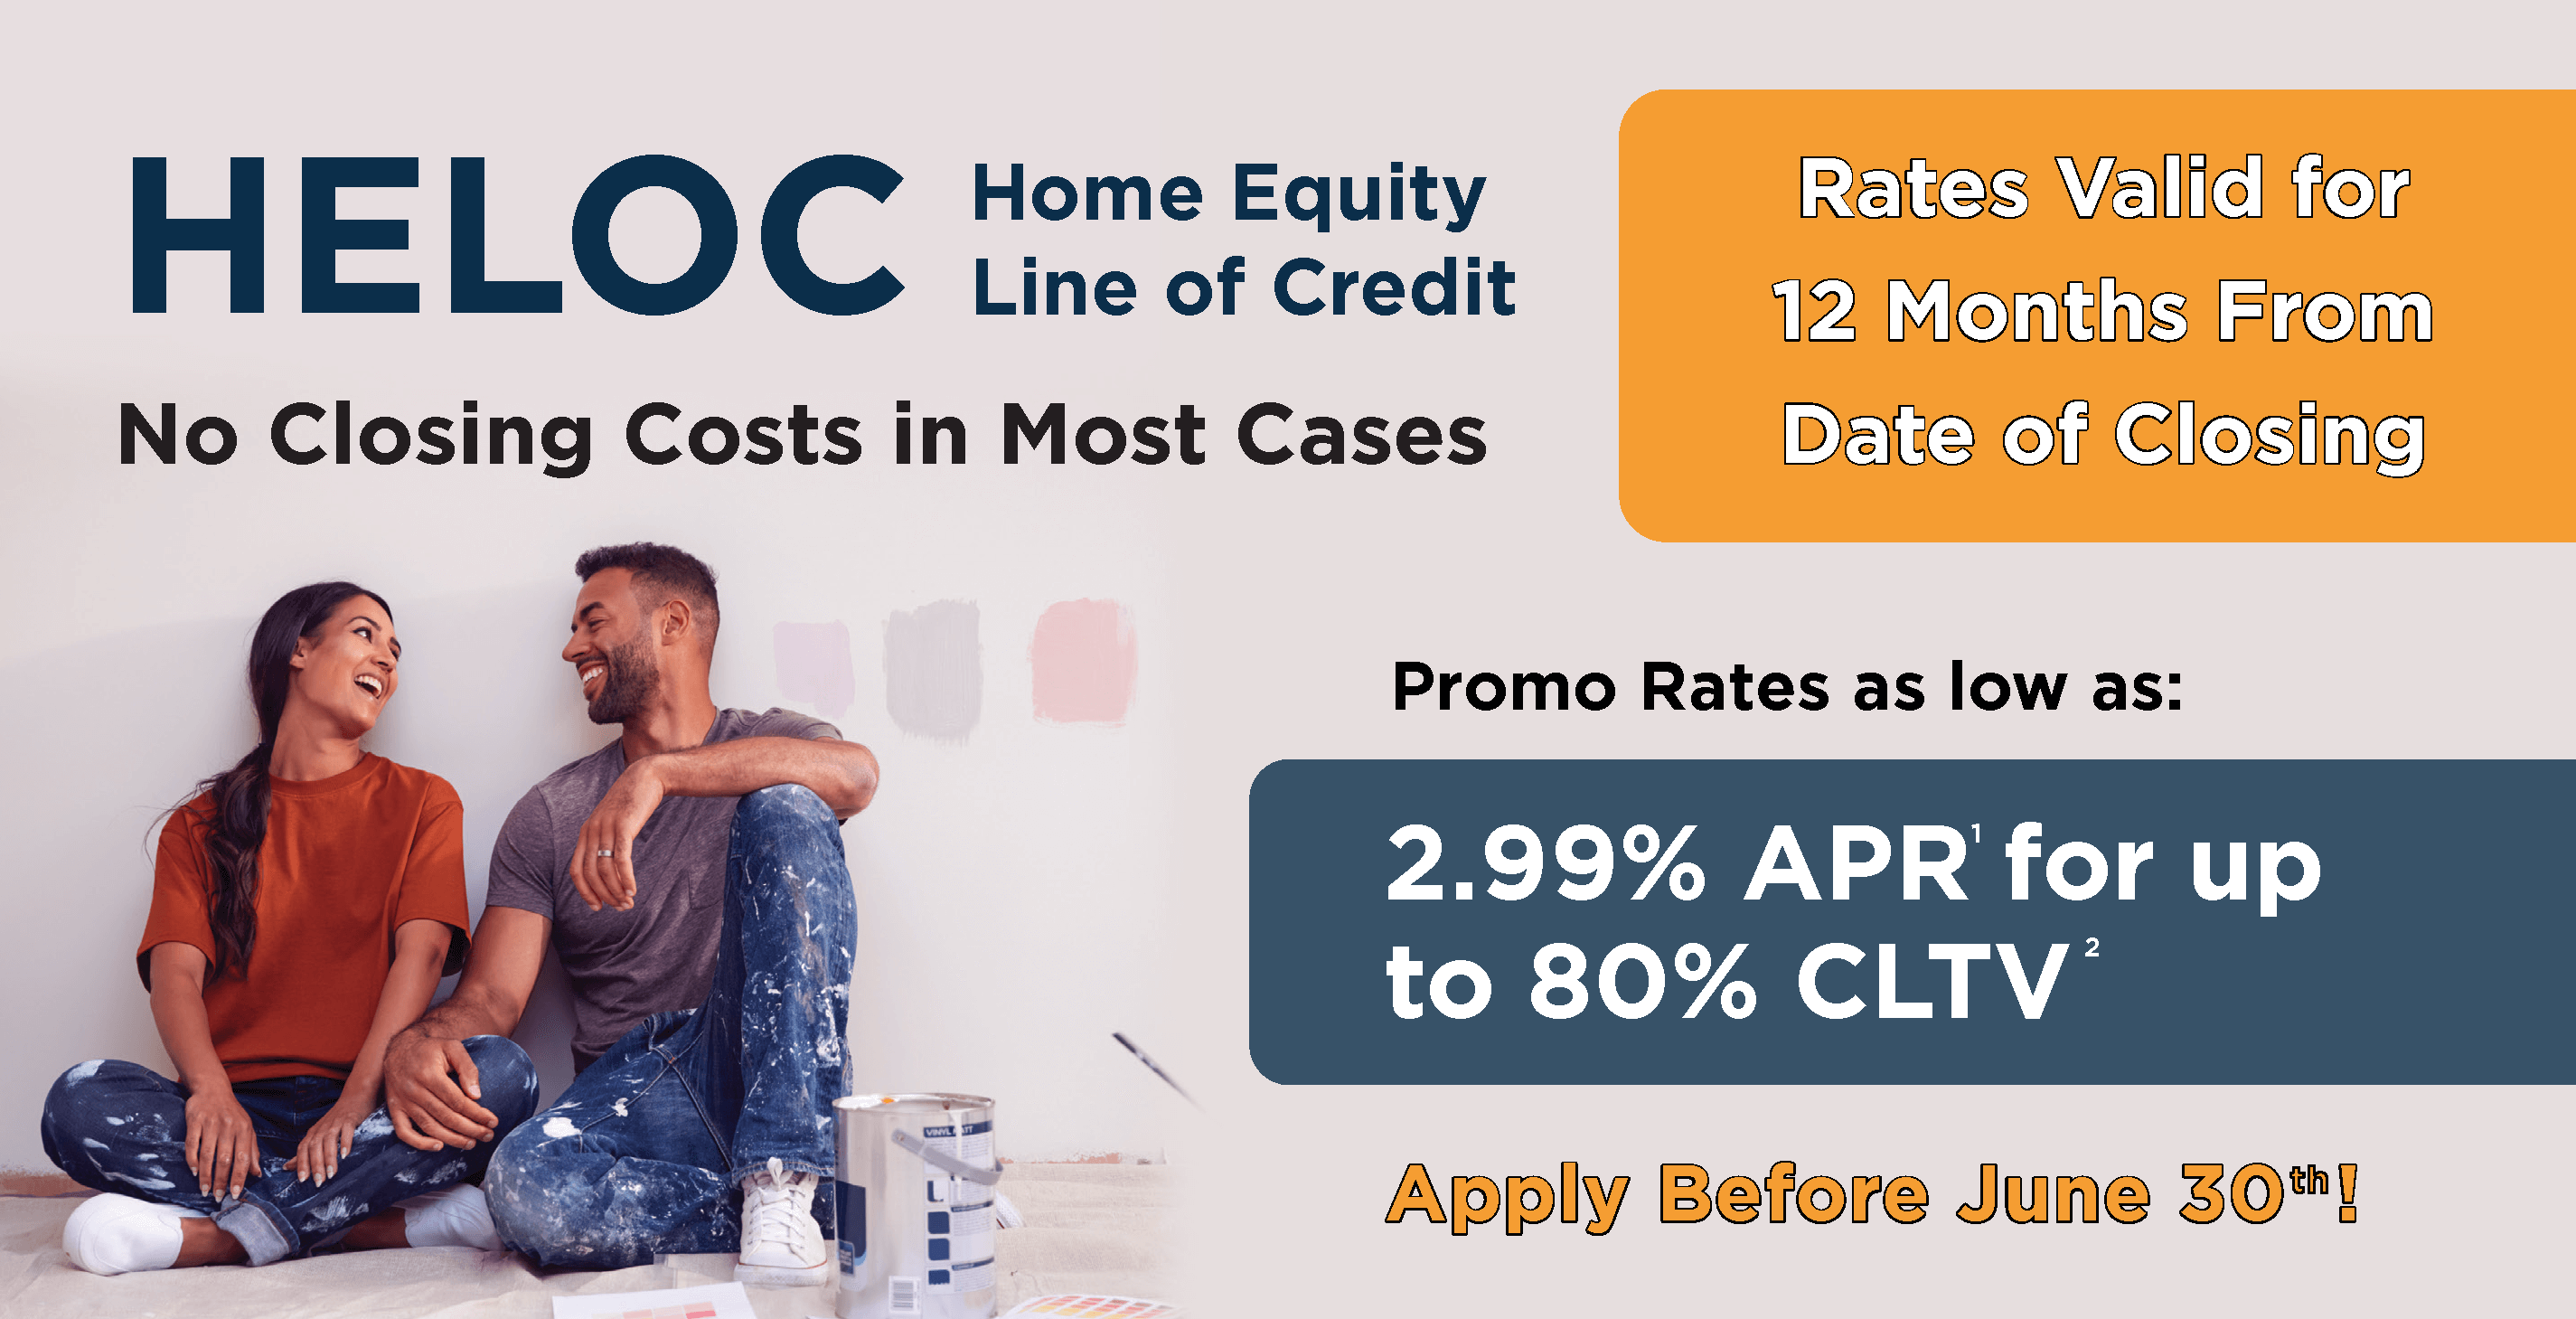 HELOC - Home Equity Line of Credit. Rates valid for 12 months from date of closing. Promo rates as 2.99%25 APR for up to 80%25 CLTV. Apply before June 30th!